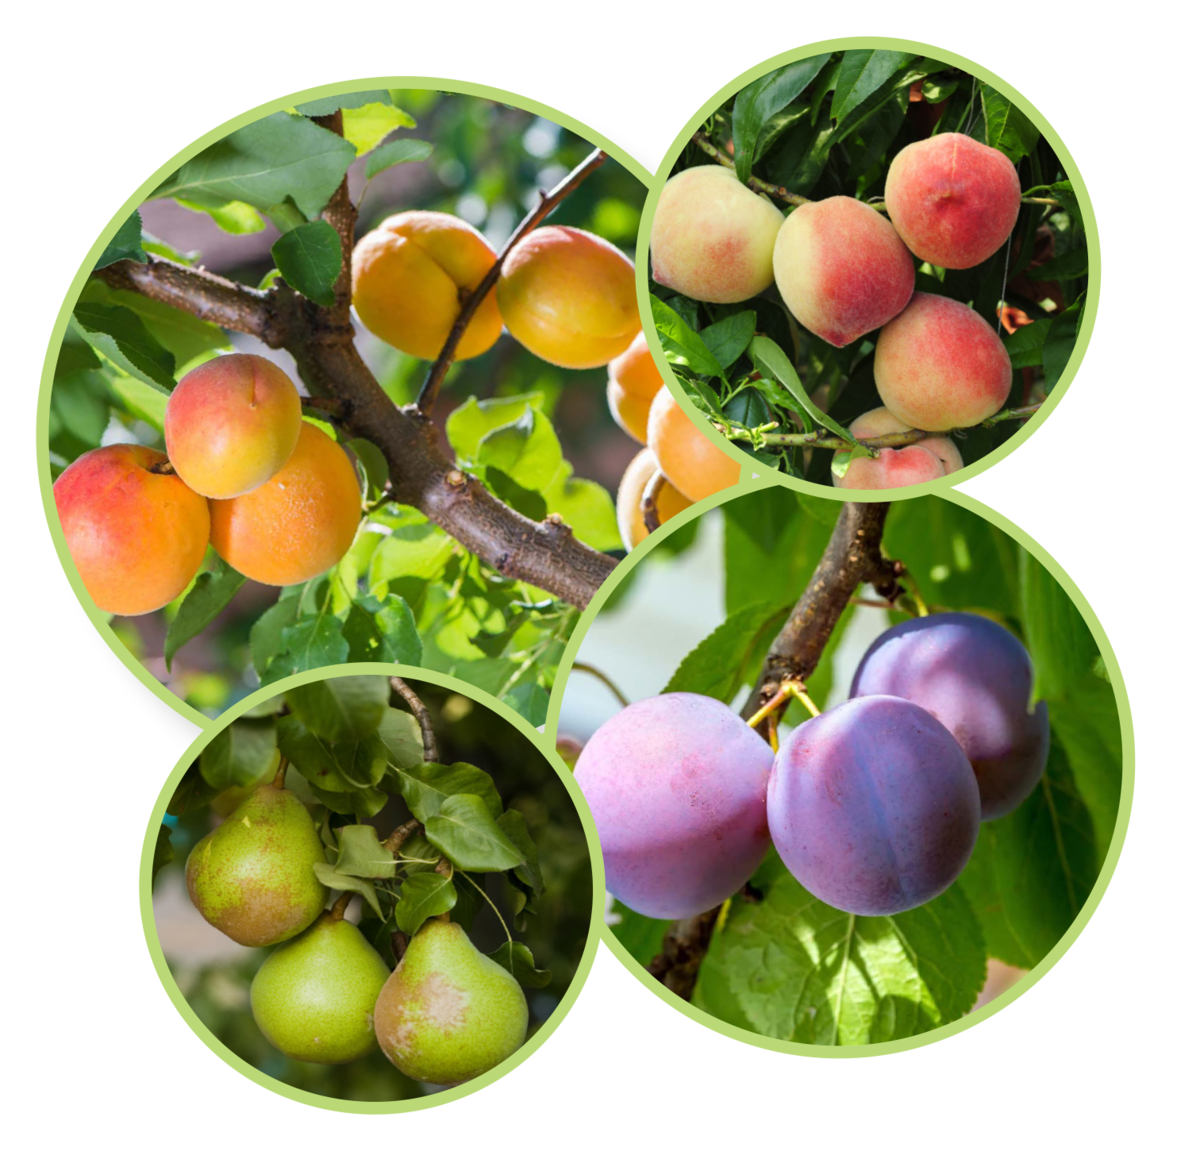 Assorted fruit trees including: apricot, peaches, plums, and pears